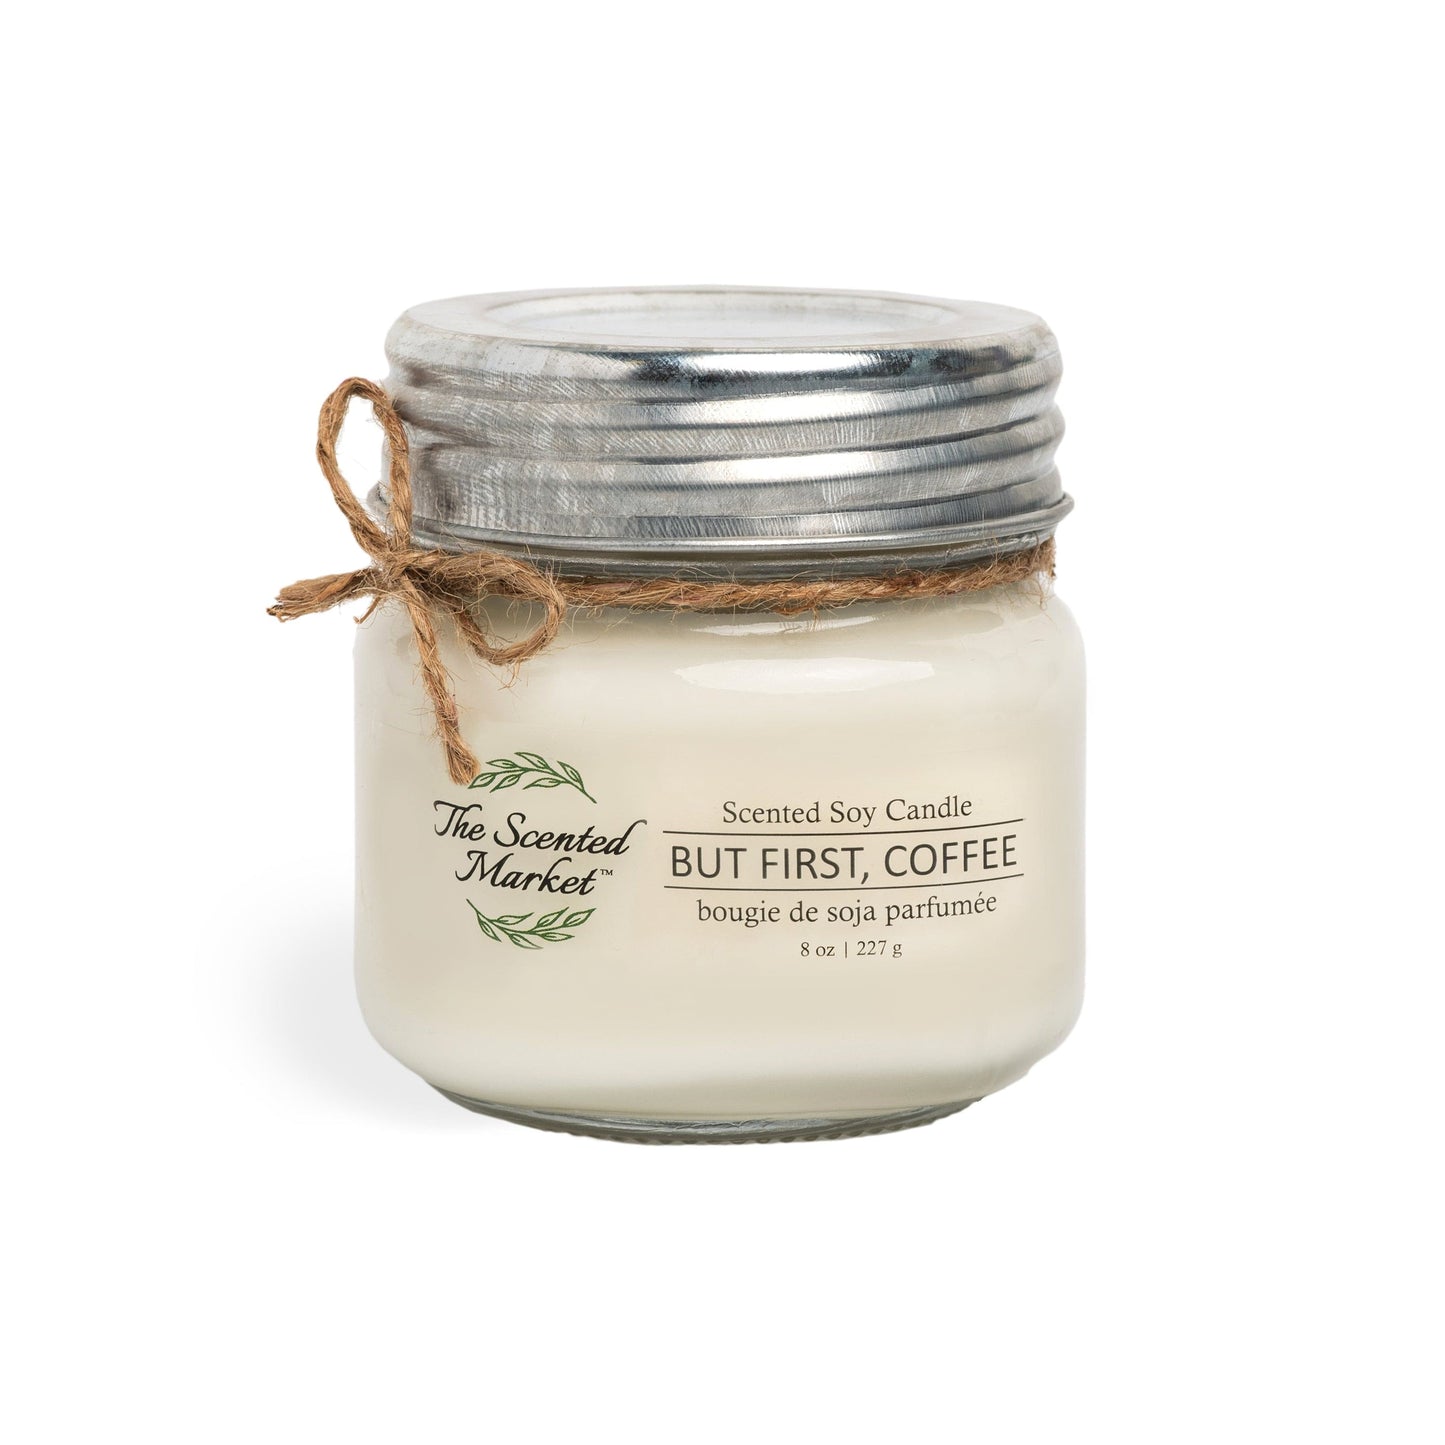 BUT FIRST, COFFEE Soy Wax Candle 8 oz